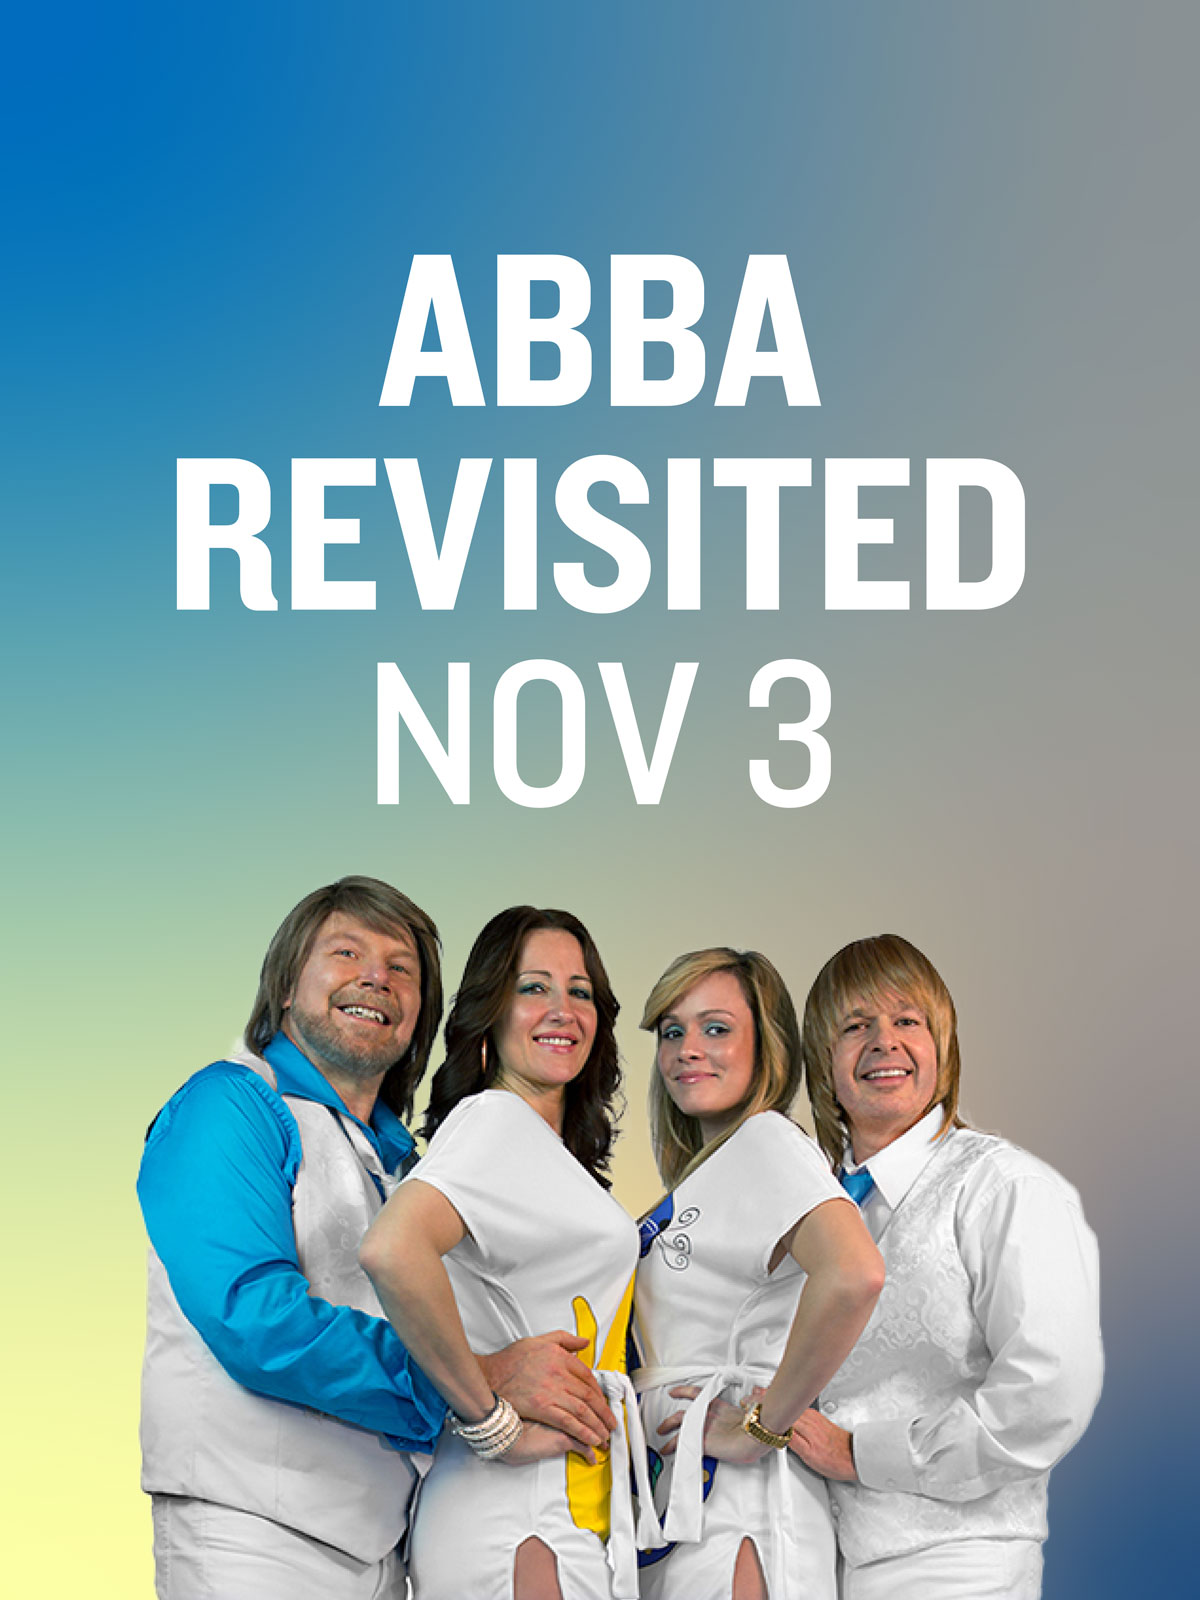 ABBA Revisited concert image